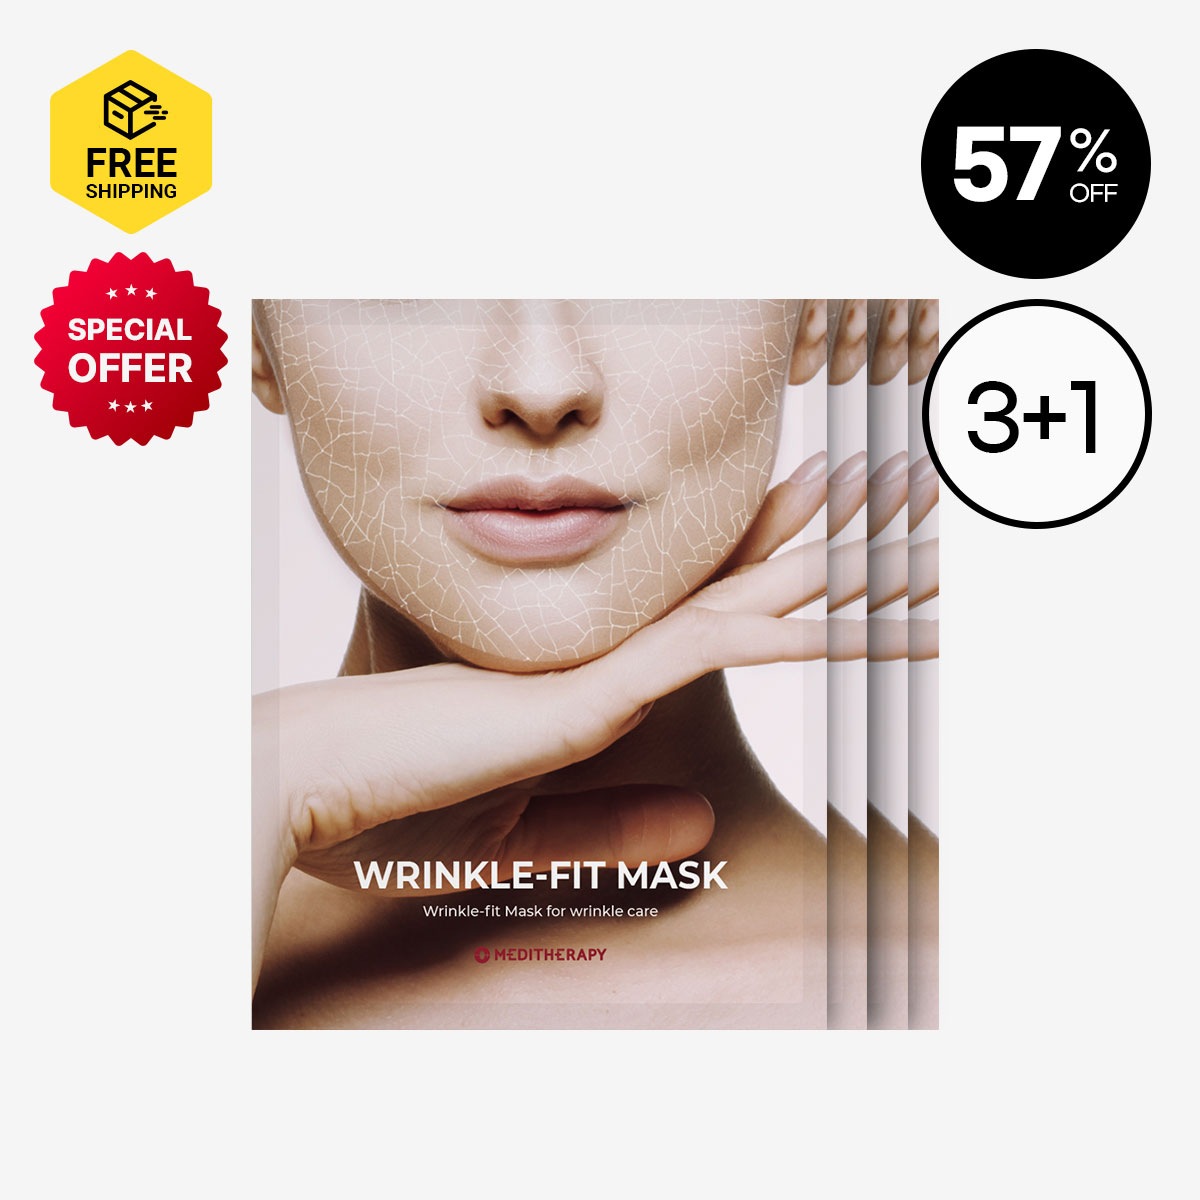 [MEDITHERAPY] [3+1] WRINKLE-FIT MASK